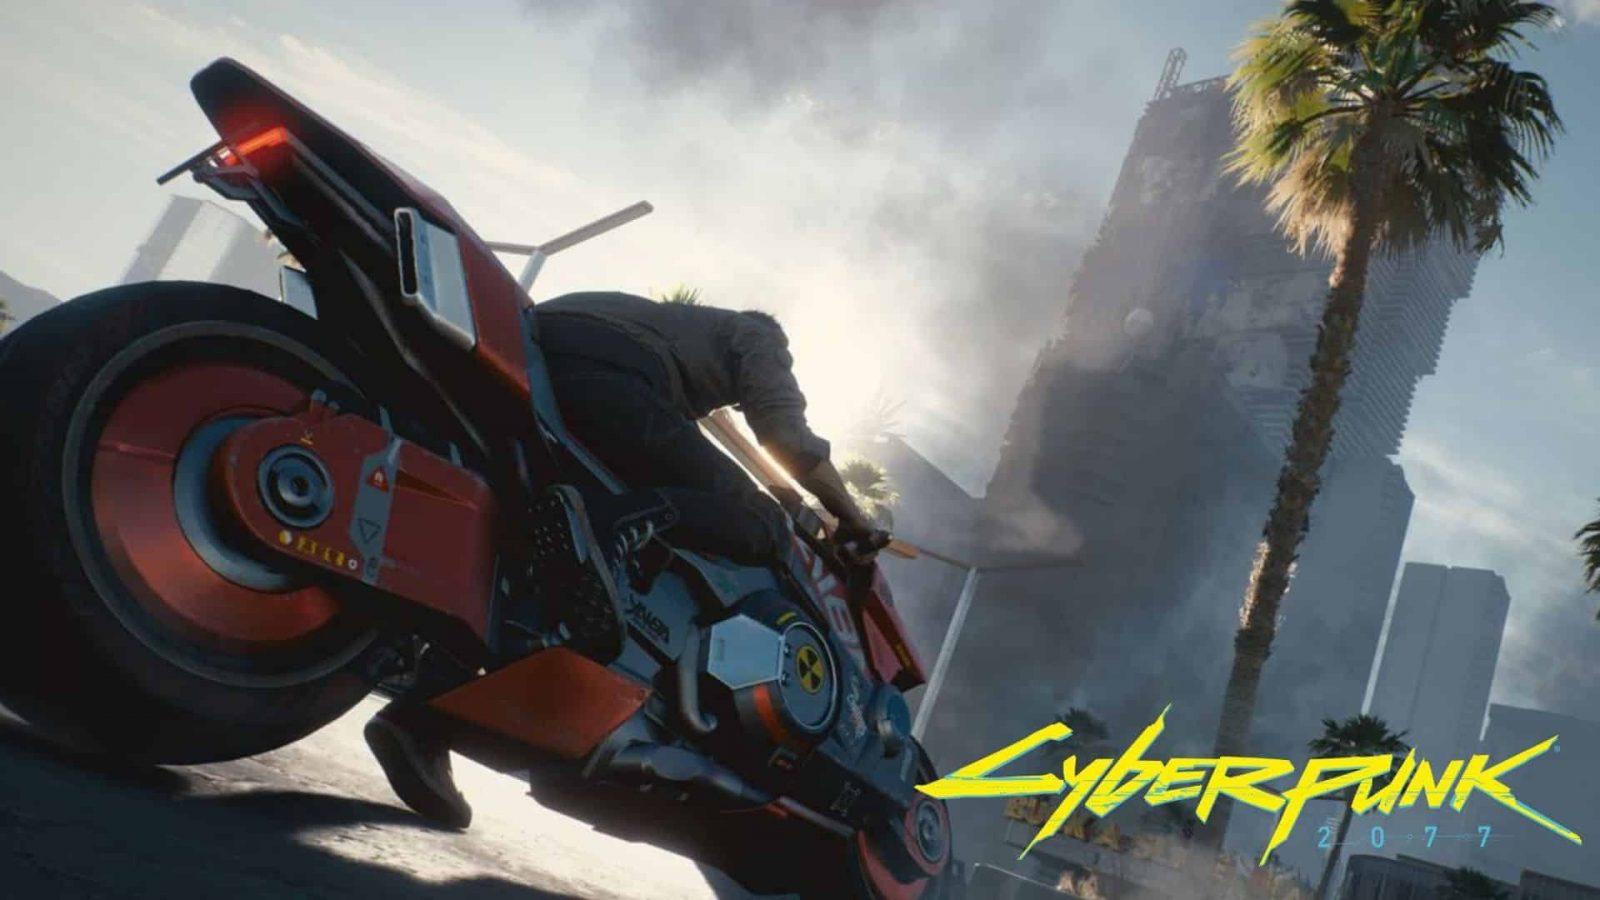 Cyberpunk 2077 finally launched on PlayStation 4, Games